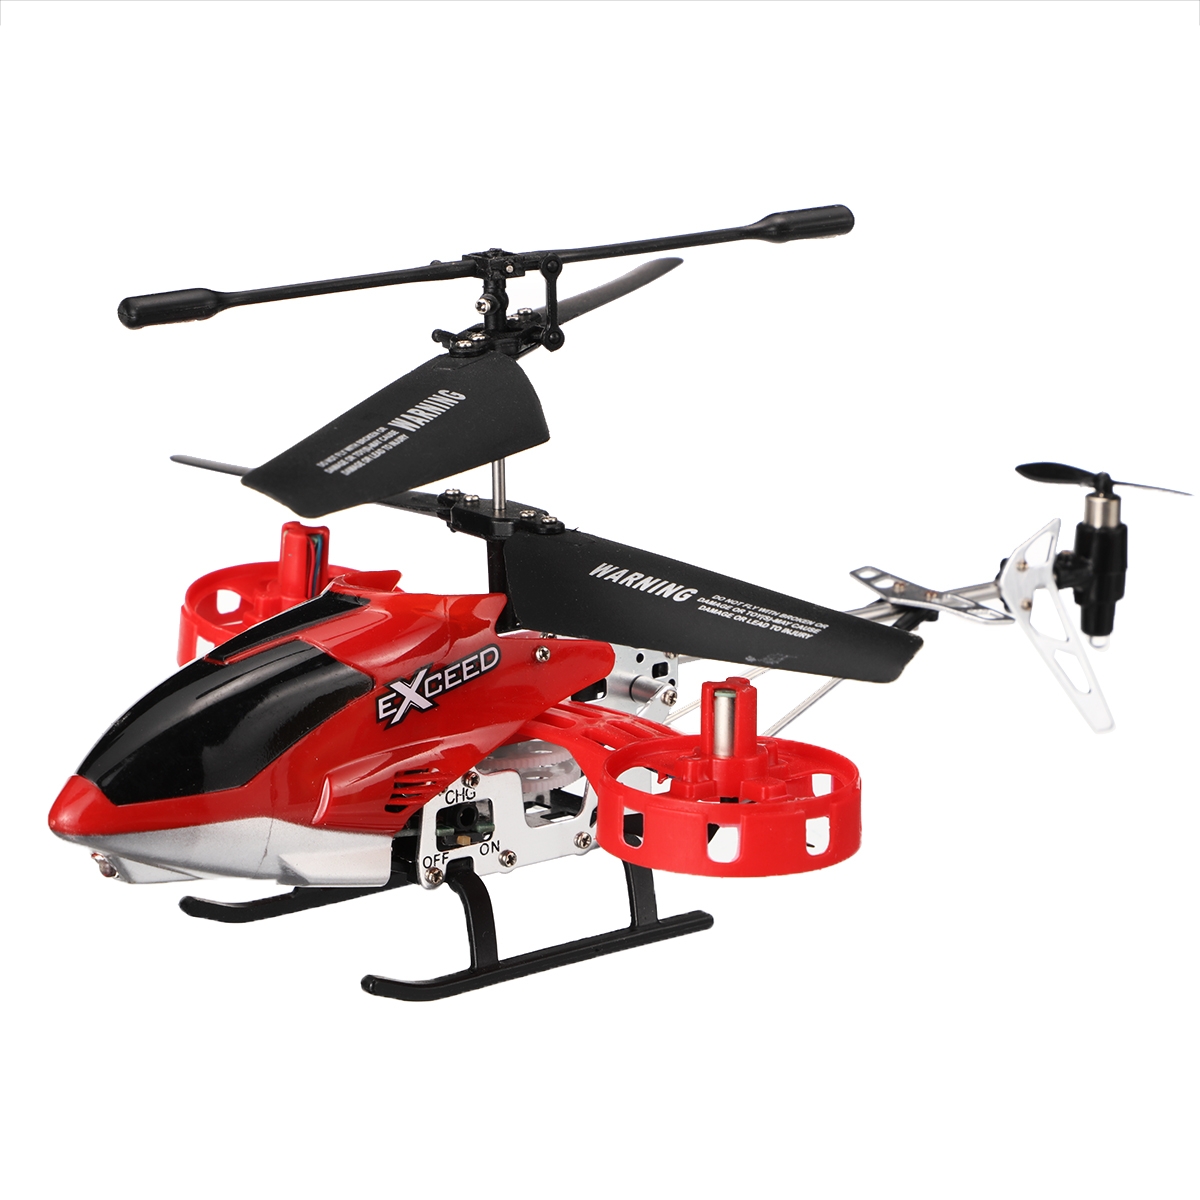 777-573 2.4G 4CH Altitude Hold RC Helicopter RTF Alloy Electric RC Model Toys